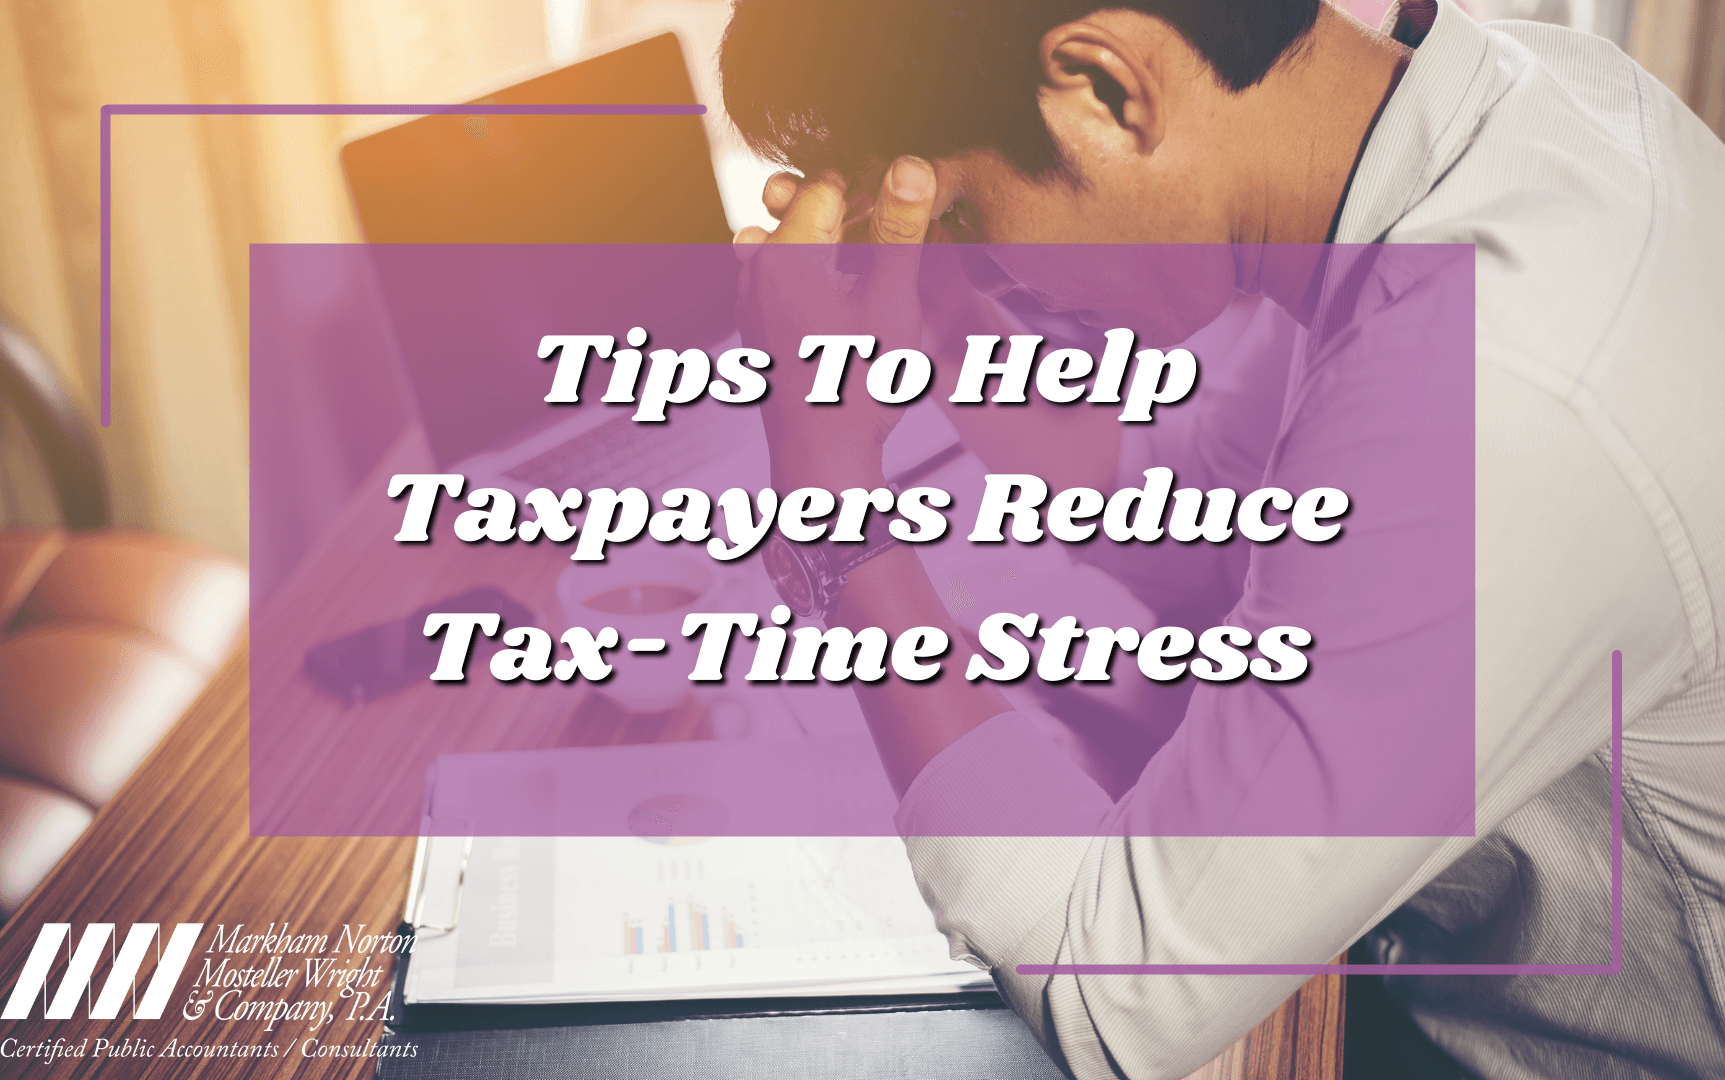 Tips to Help Taxpayers Reduce Tax-Time Stress